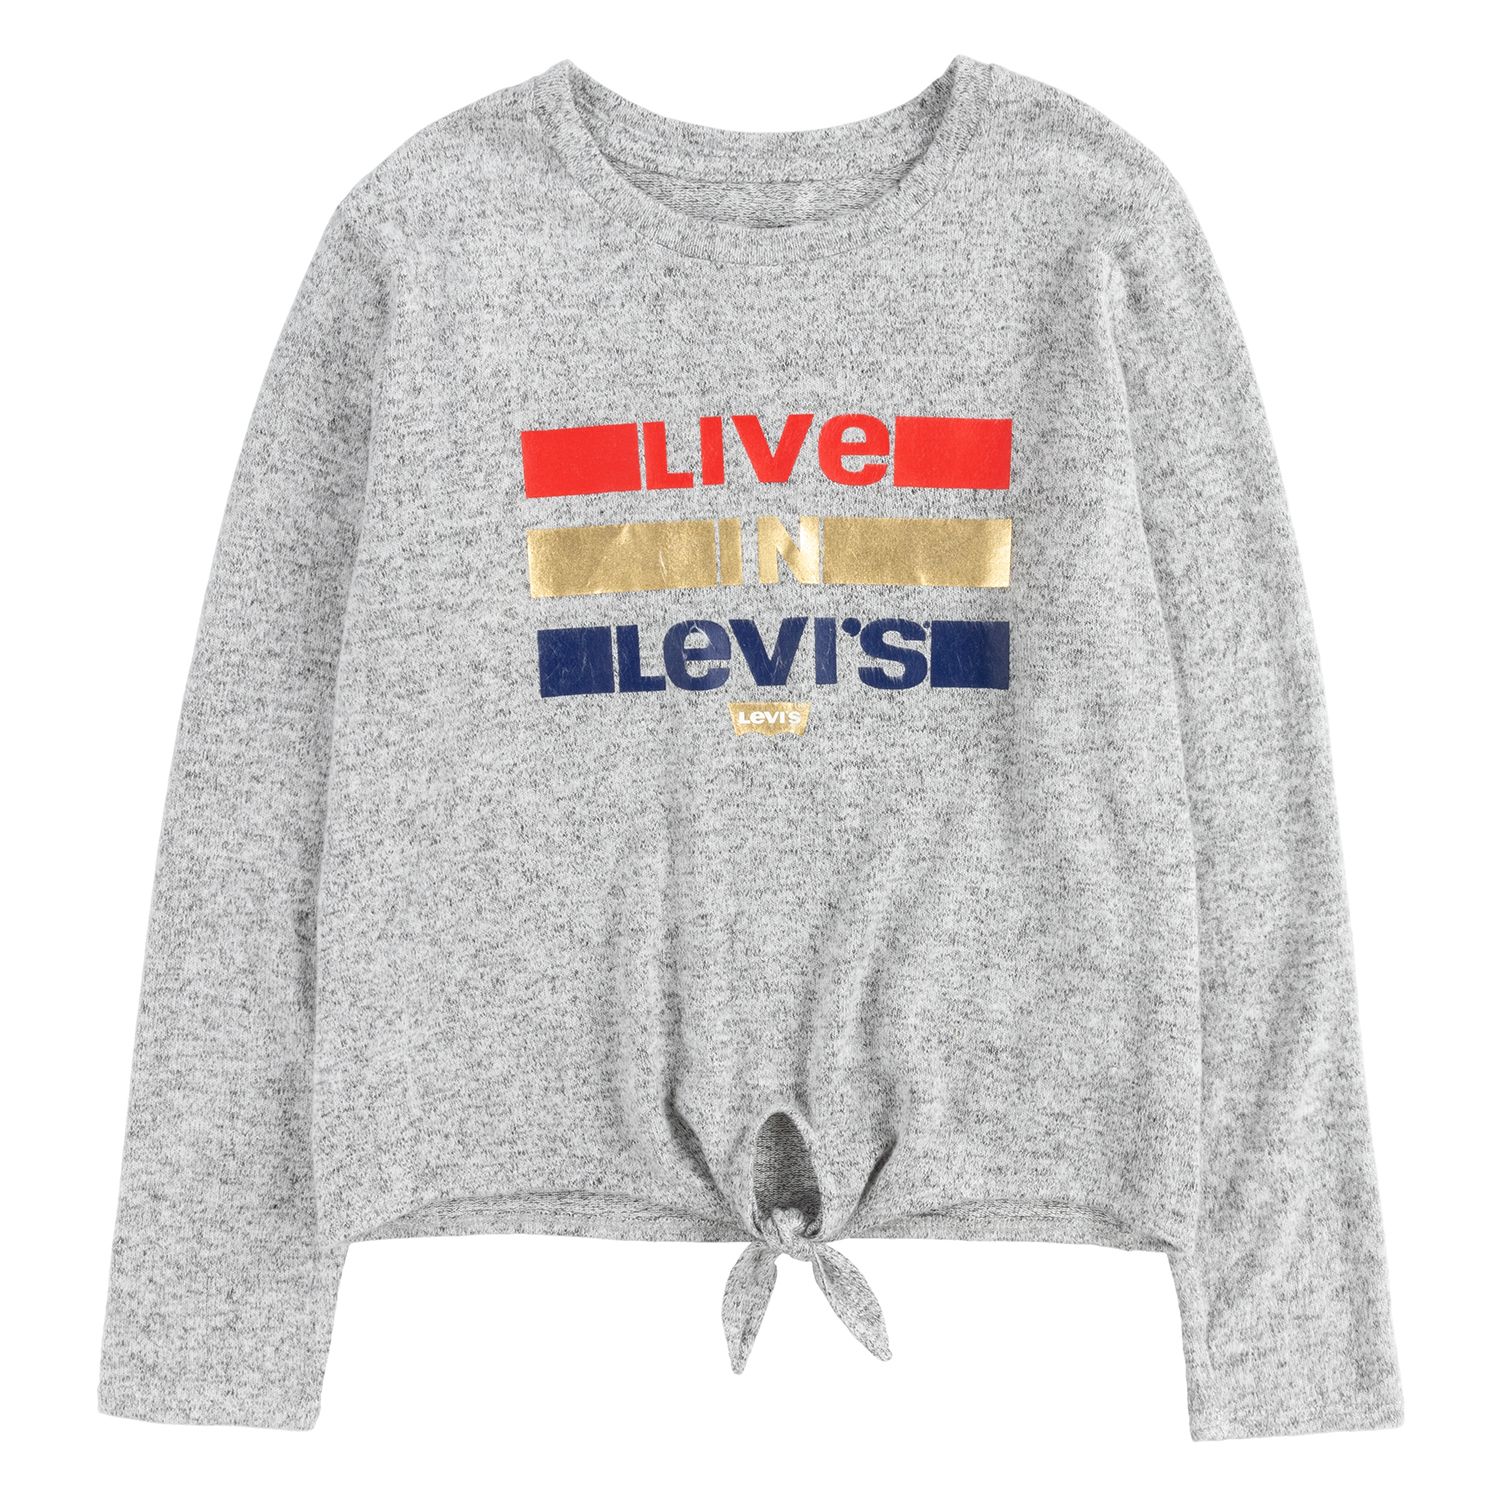 levis tops for girls